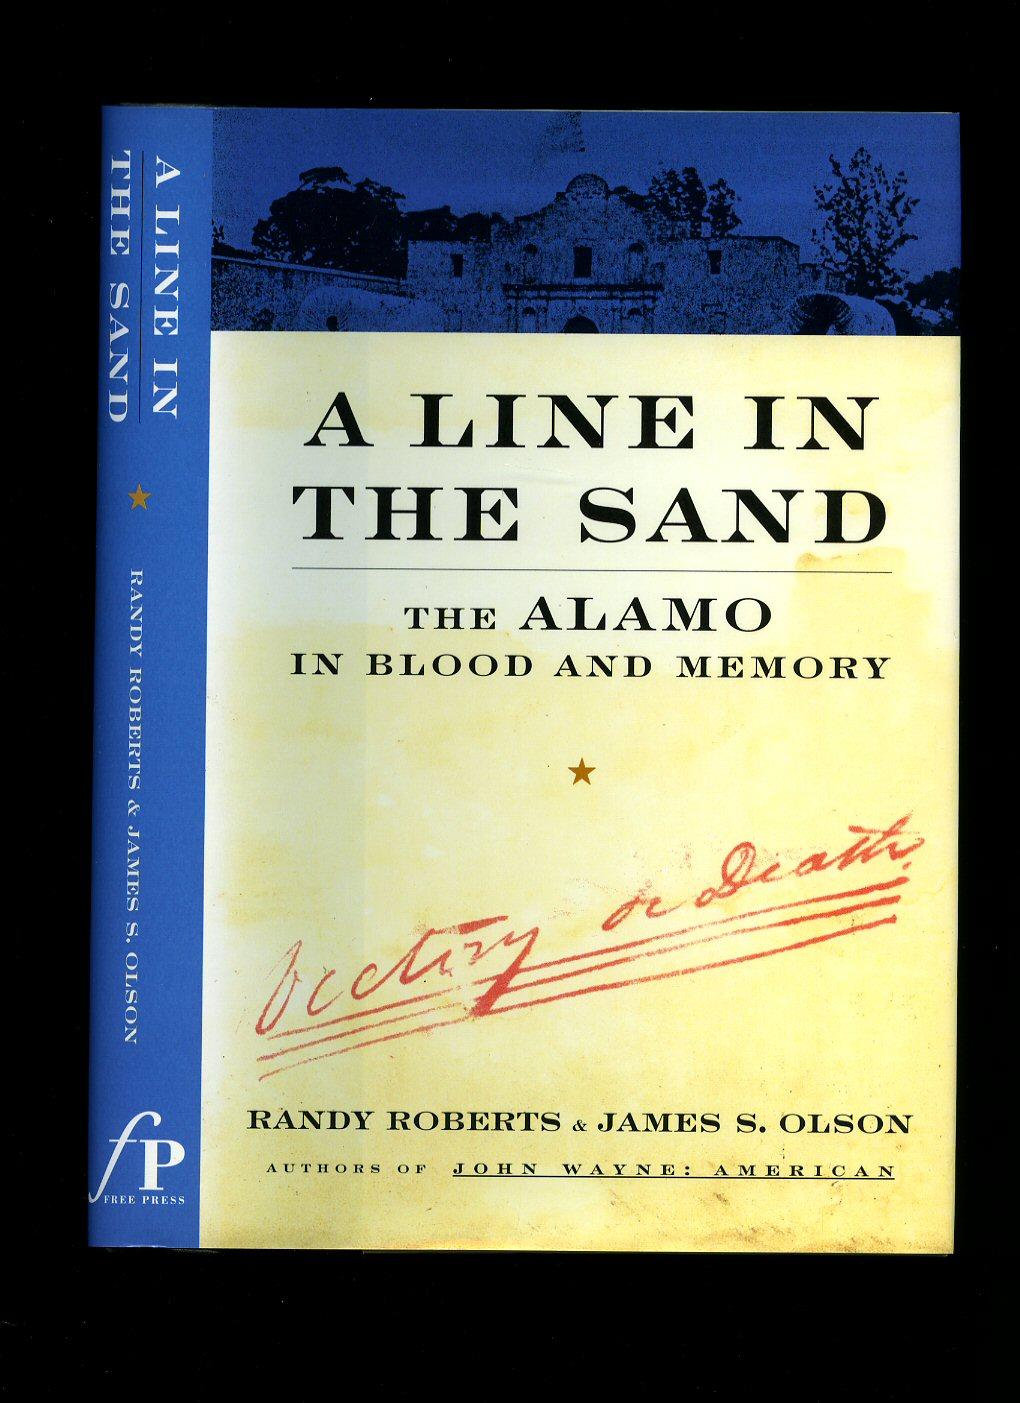 A Line in the Sand; The Alamo in Blood and Memory - Randy Roberts and James S. Olson